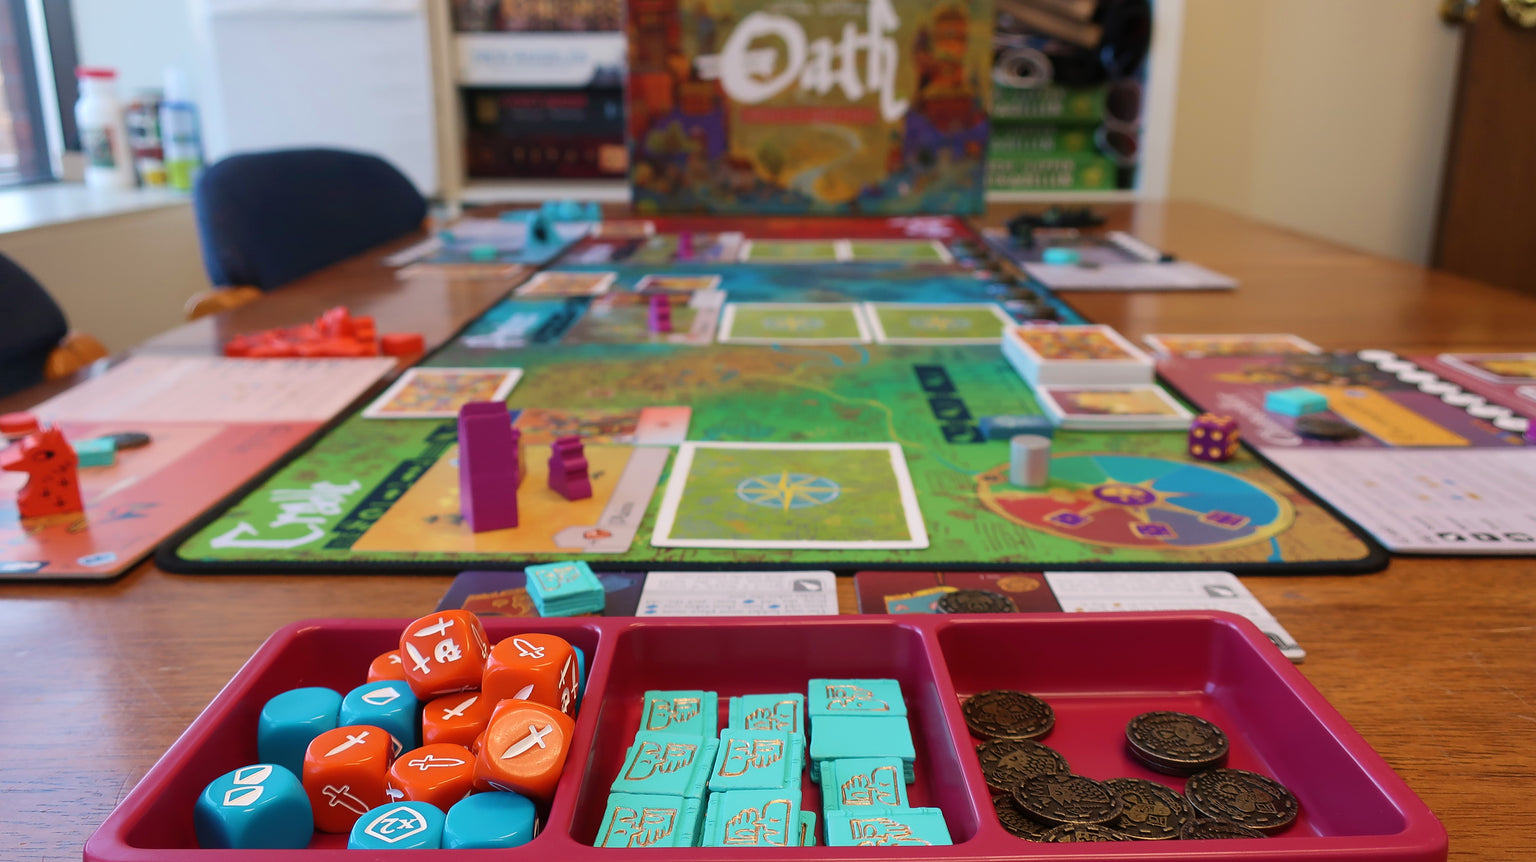 Oath the Board Game set up on a wooden table. Your view is from the far end over a tray with dice and tokens, with the set up board between you and the box cover at the other end.